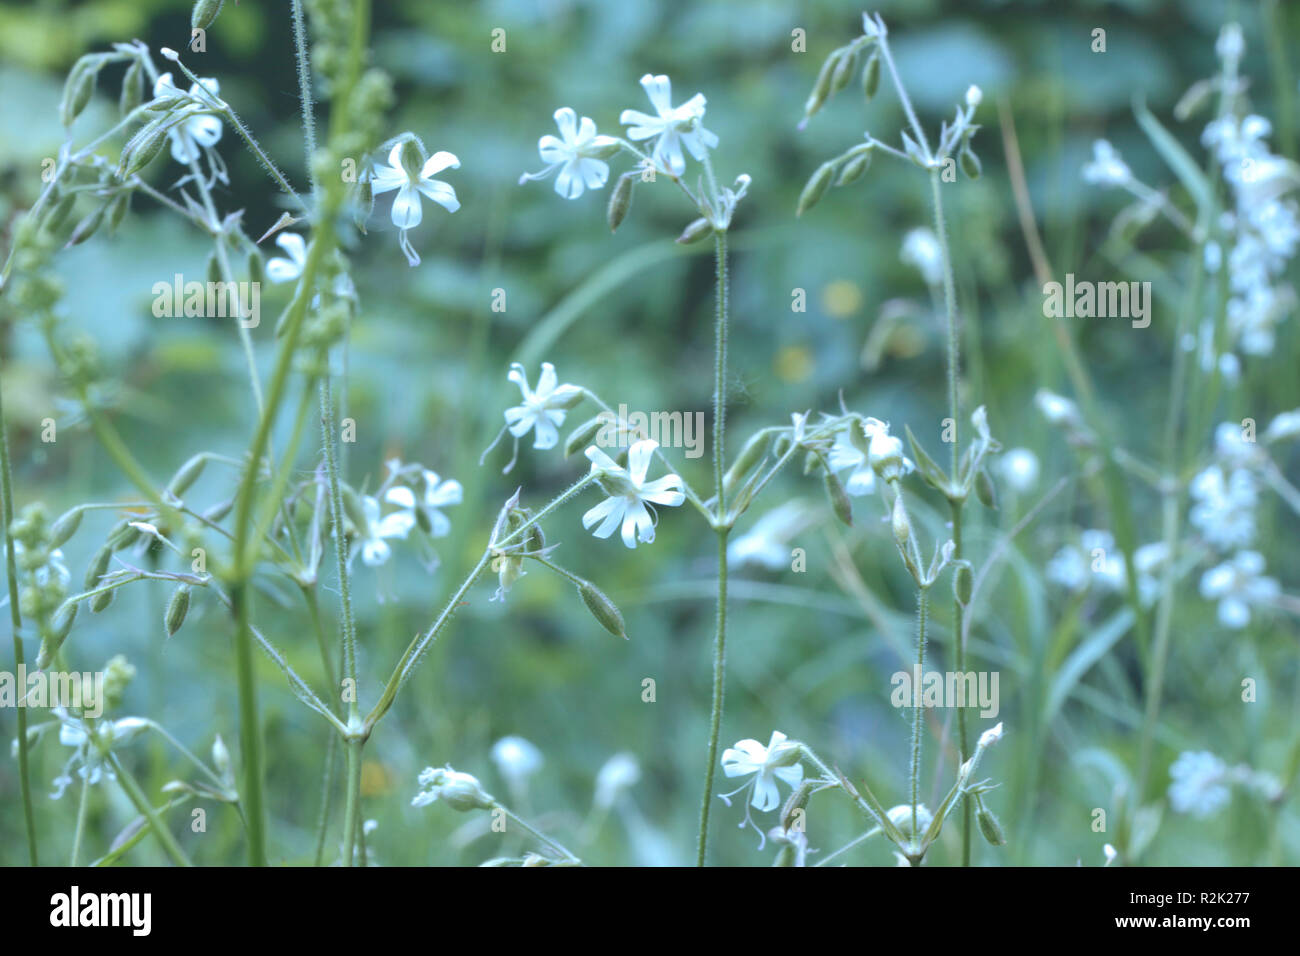 Flowers, forked catchfly, Silene dichotoma, Stock Photo